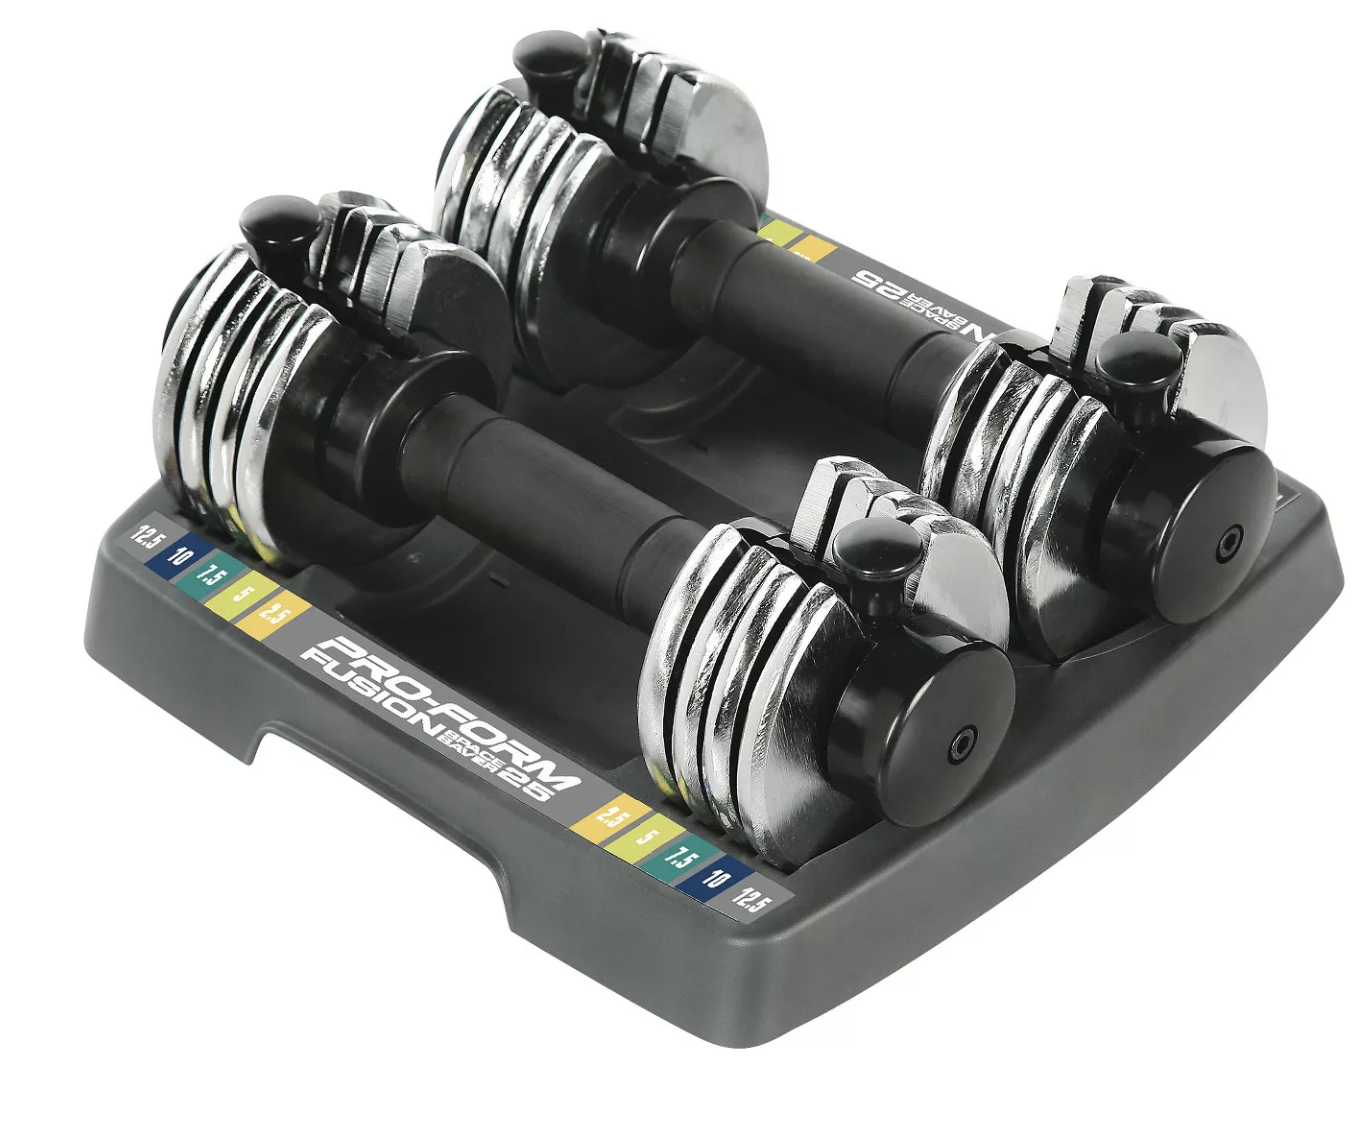 Adjustable Weights Up to 12.5, $64